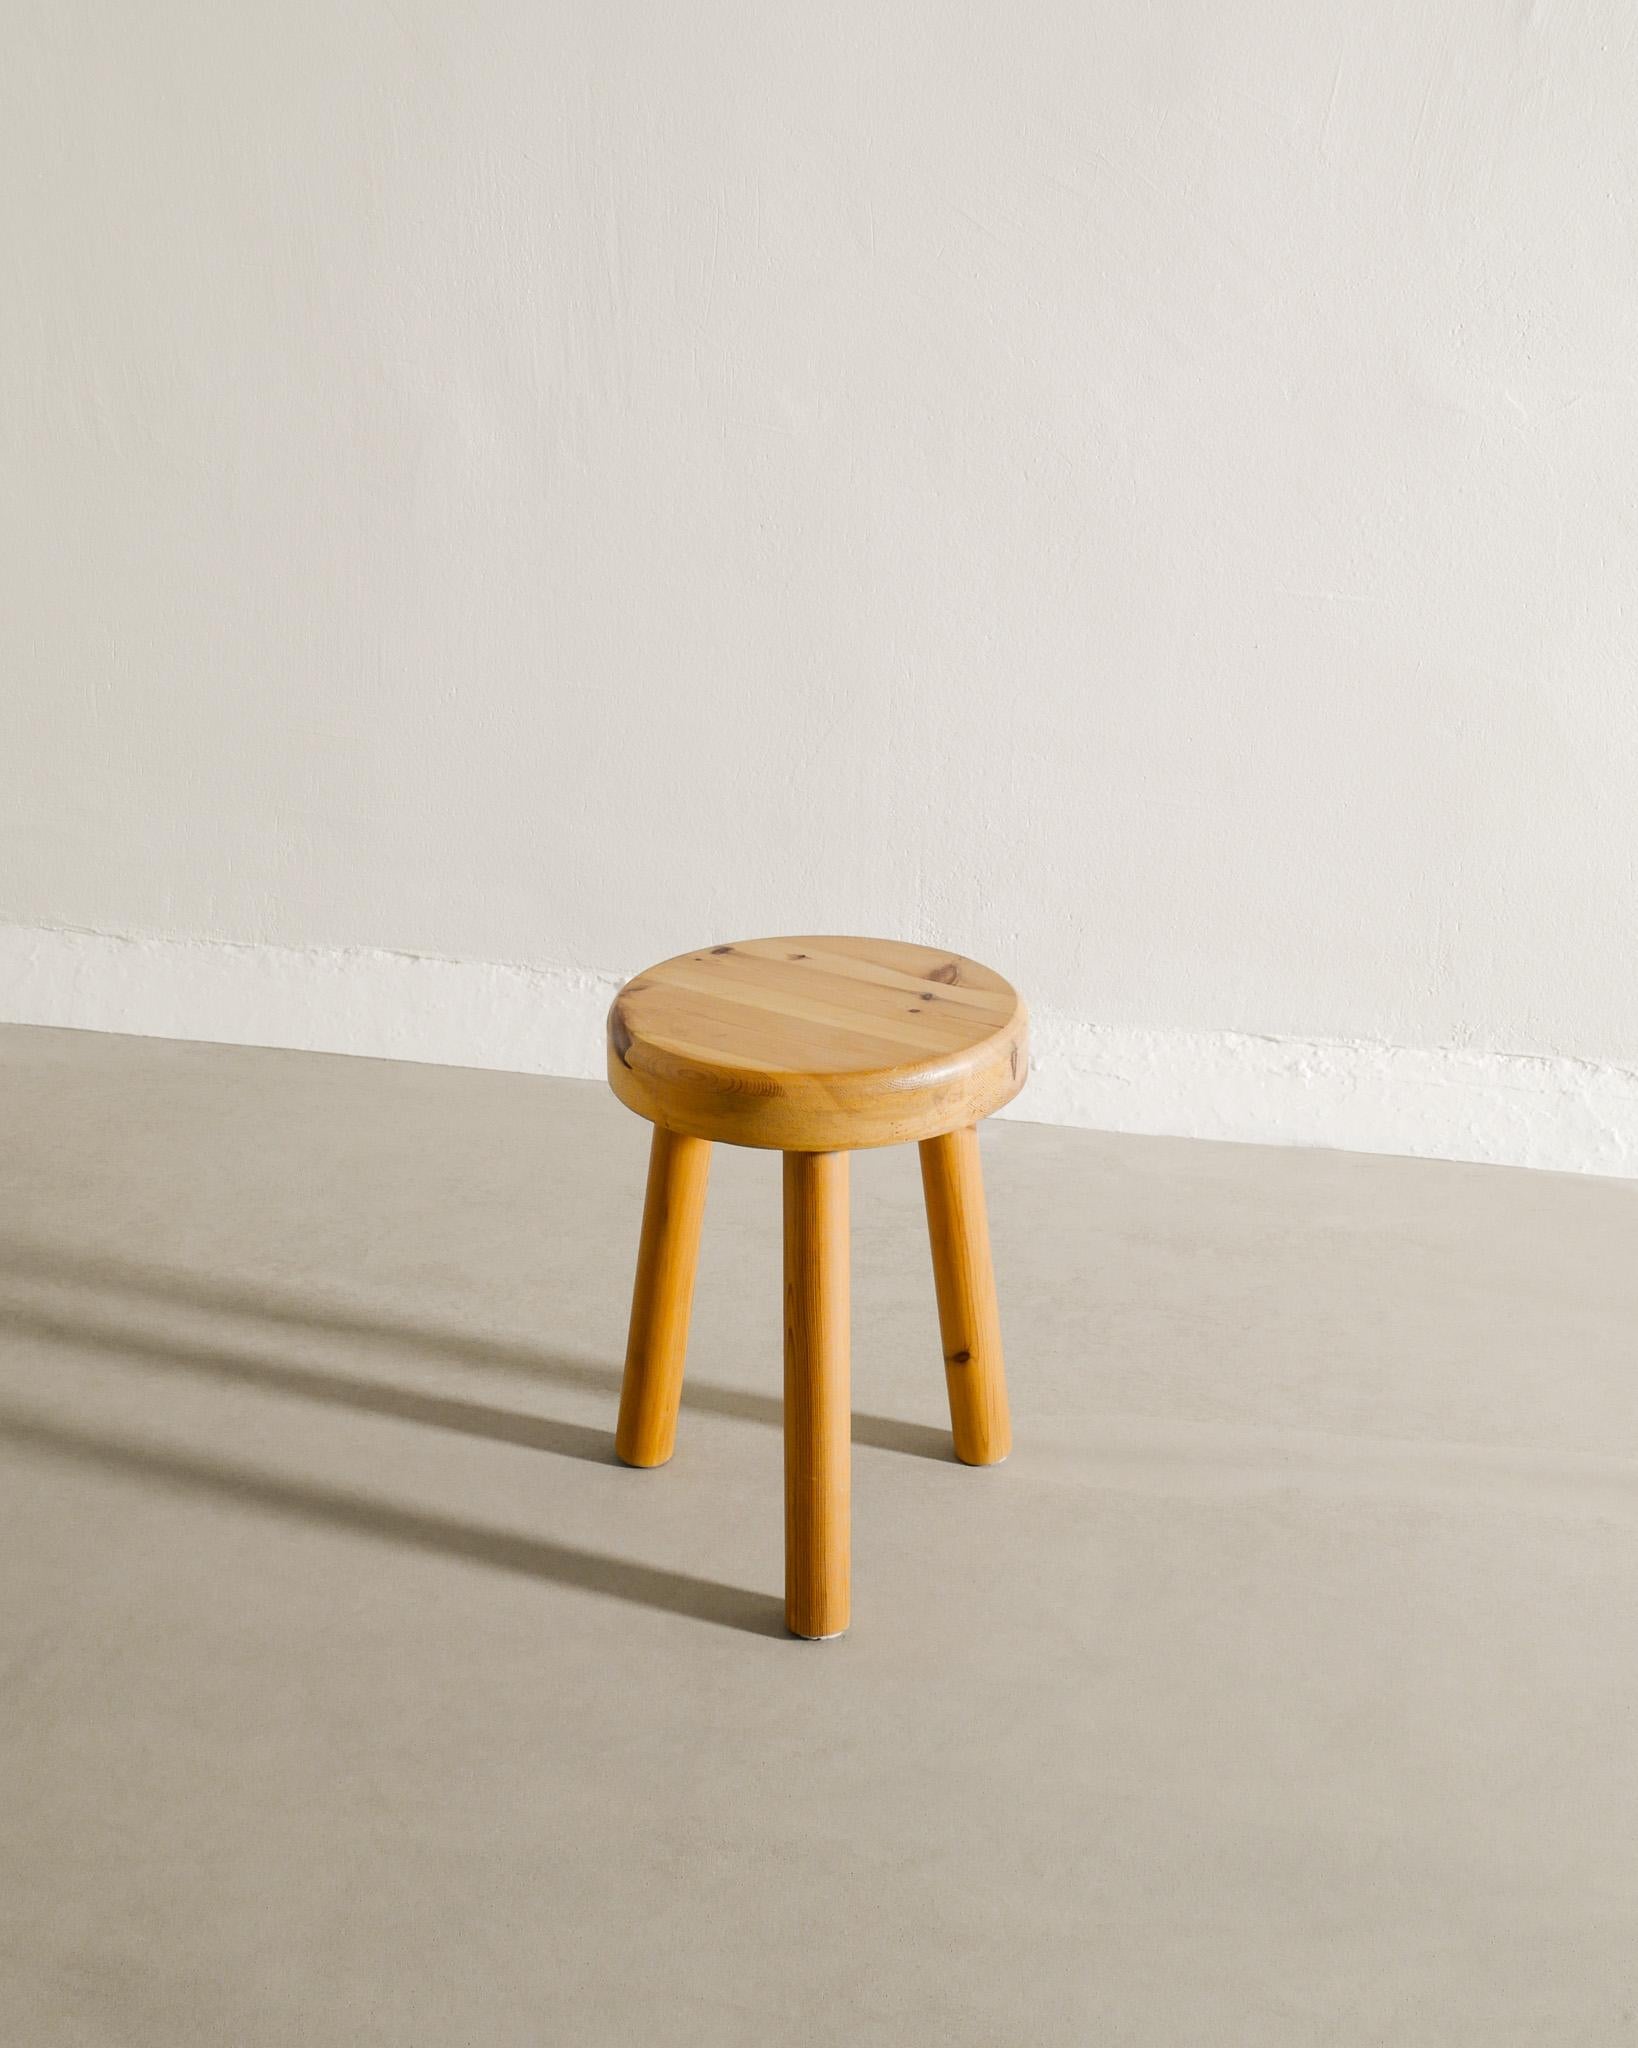 Rare wooden mid century three legged low stool in pine produced in Sweden 1960s. In good original condition. Stamped 